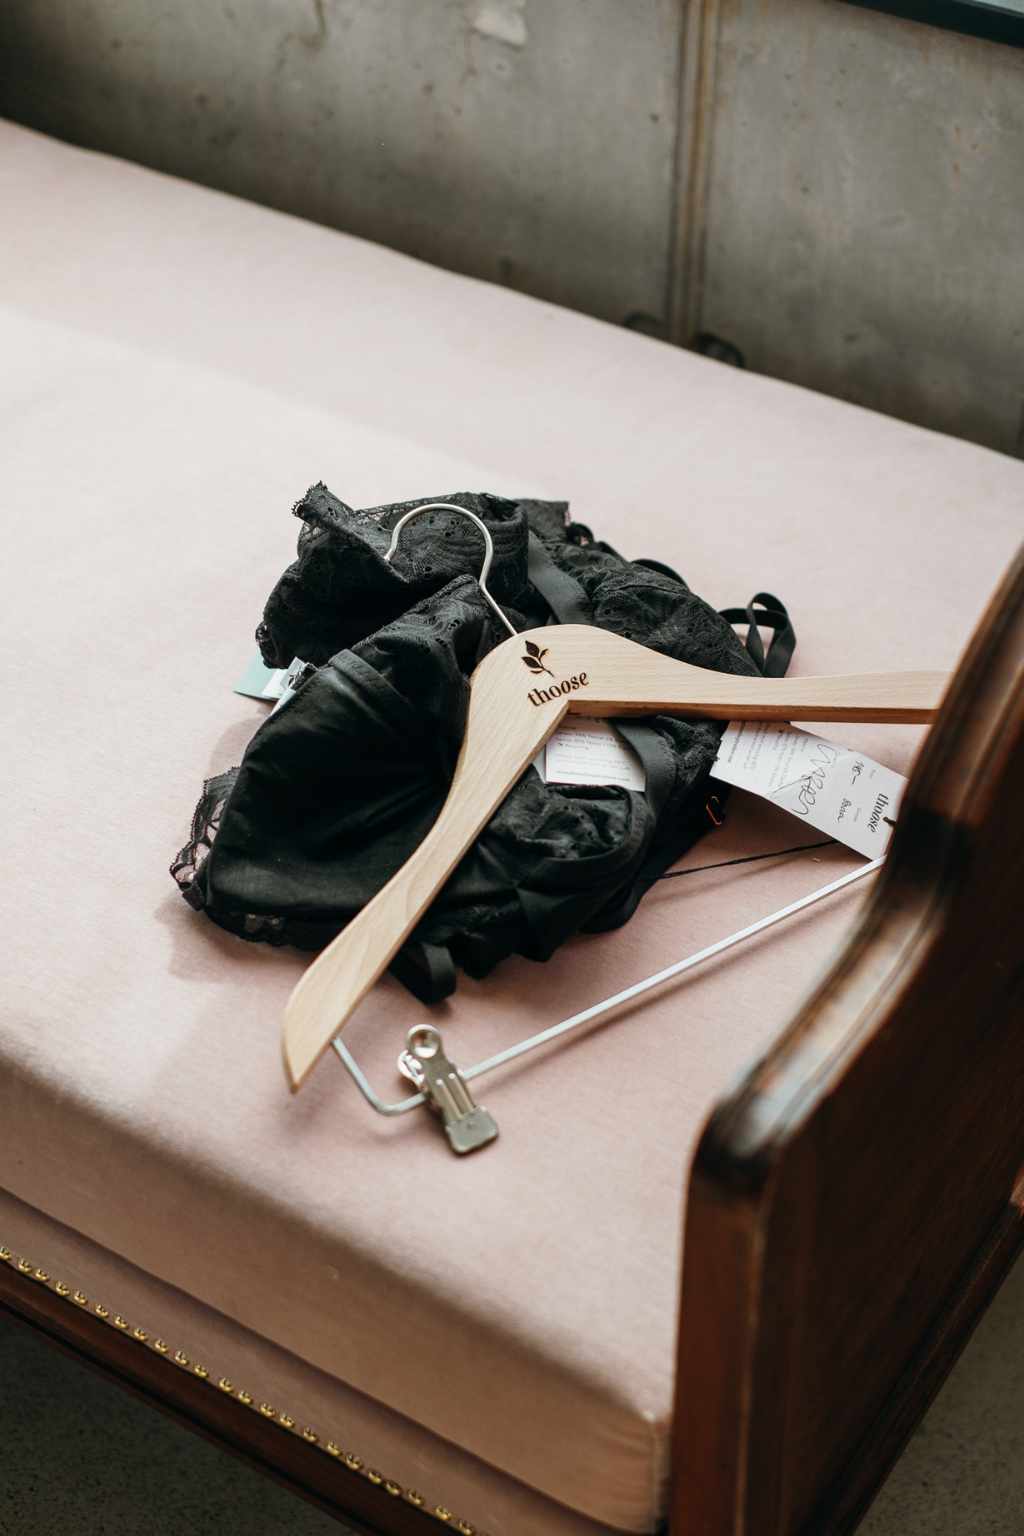 Black clothes and a coat hanger lie on a rose sofa.